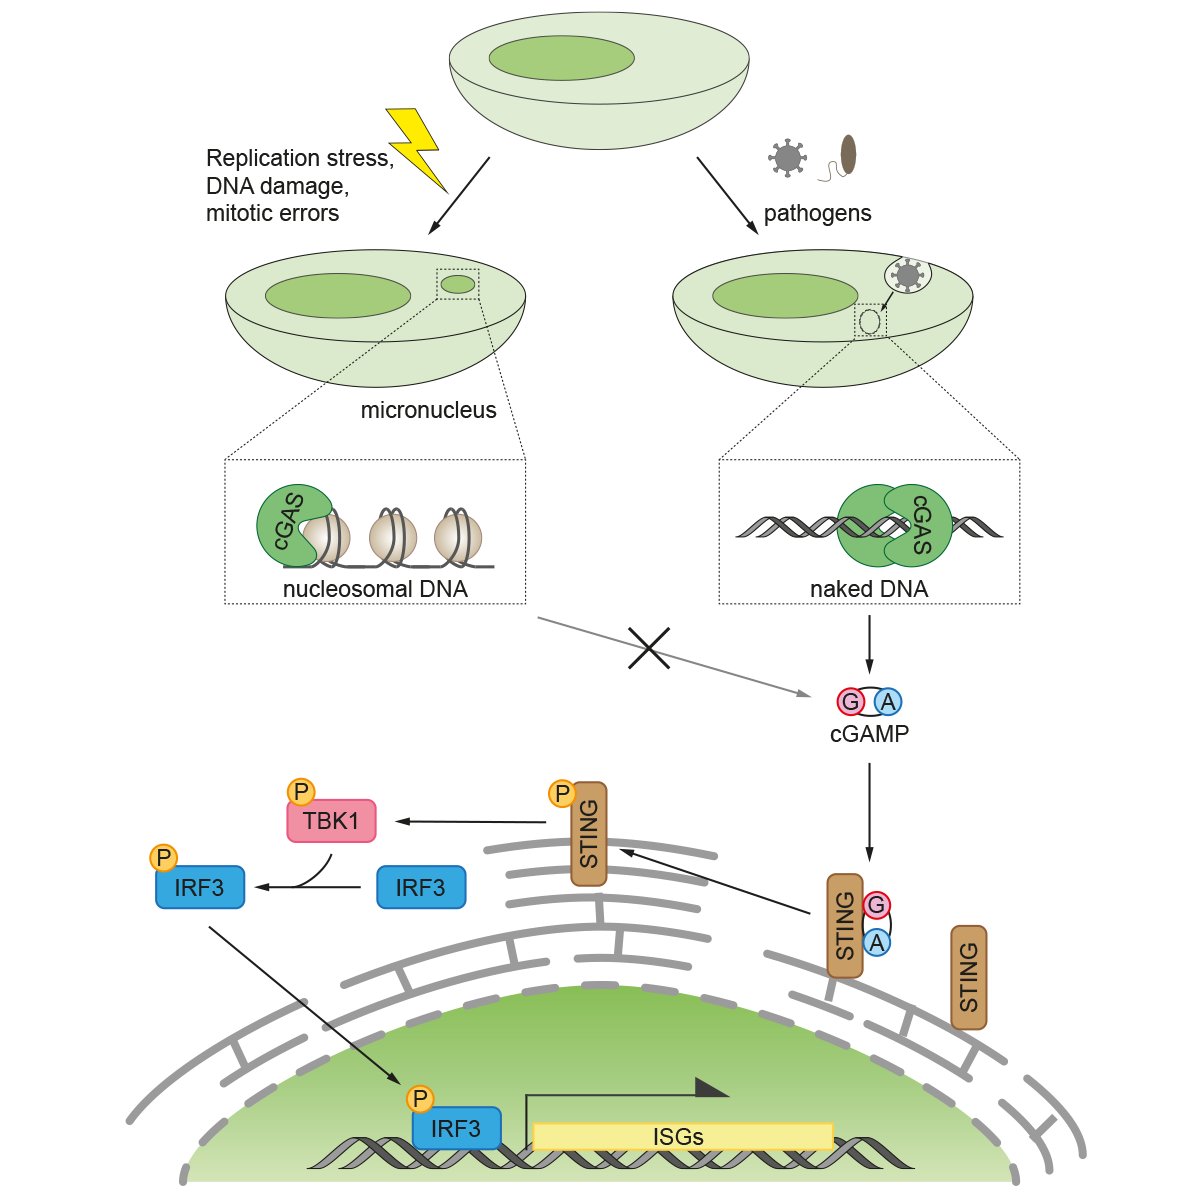 Our latest is out! 🥳We found cGAS engaged w/ ruptured micronuclei can't activate downstream signalling. Our observation challenges current dogma that cGAS binds to self-DNA in micronuclei and triggers innate immune signalling. Spearheaded by Tohru @Wgctt1 with @Rhona_mill.